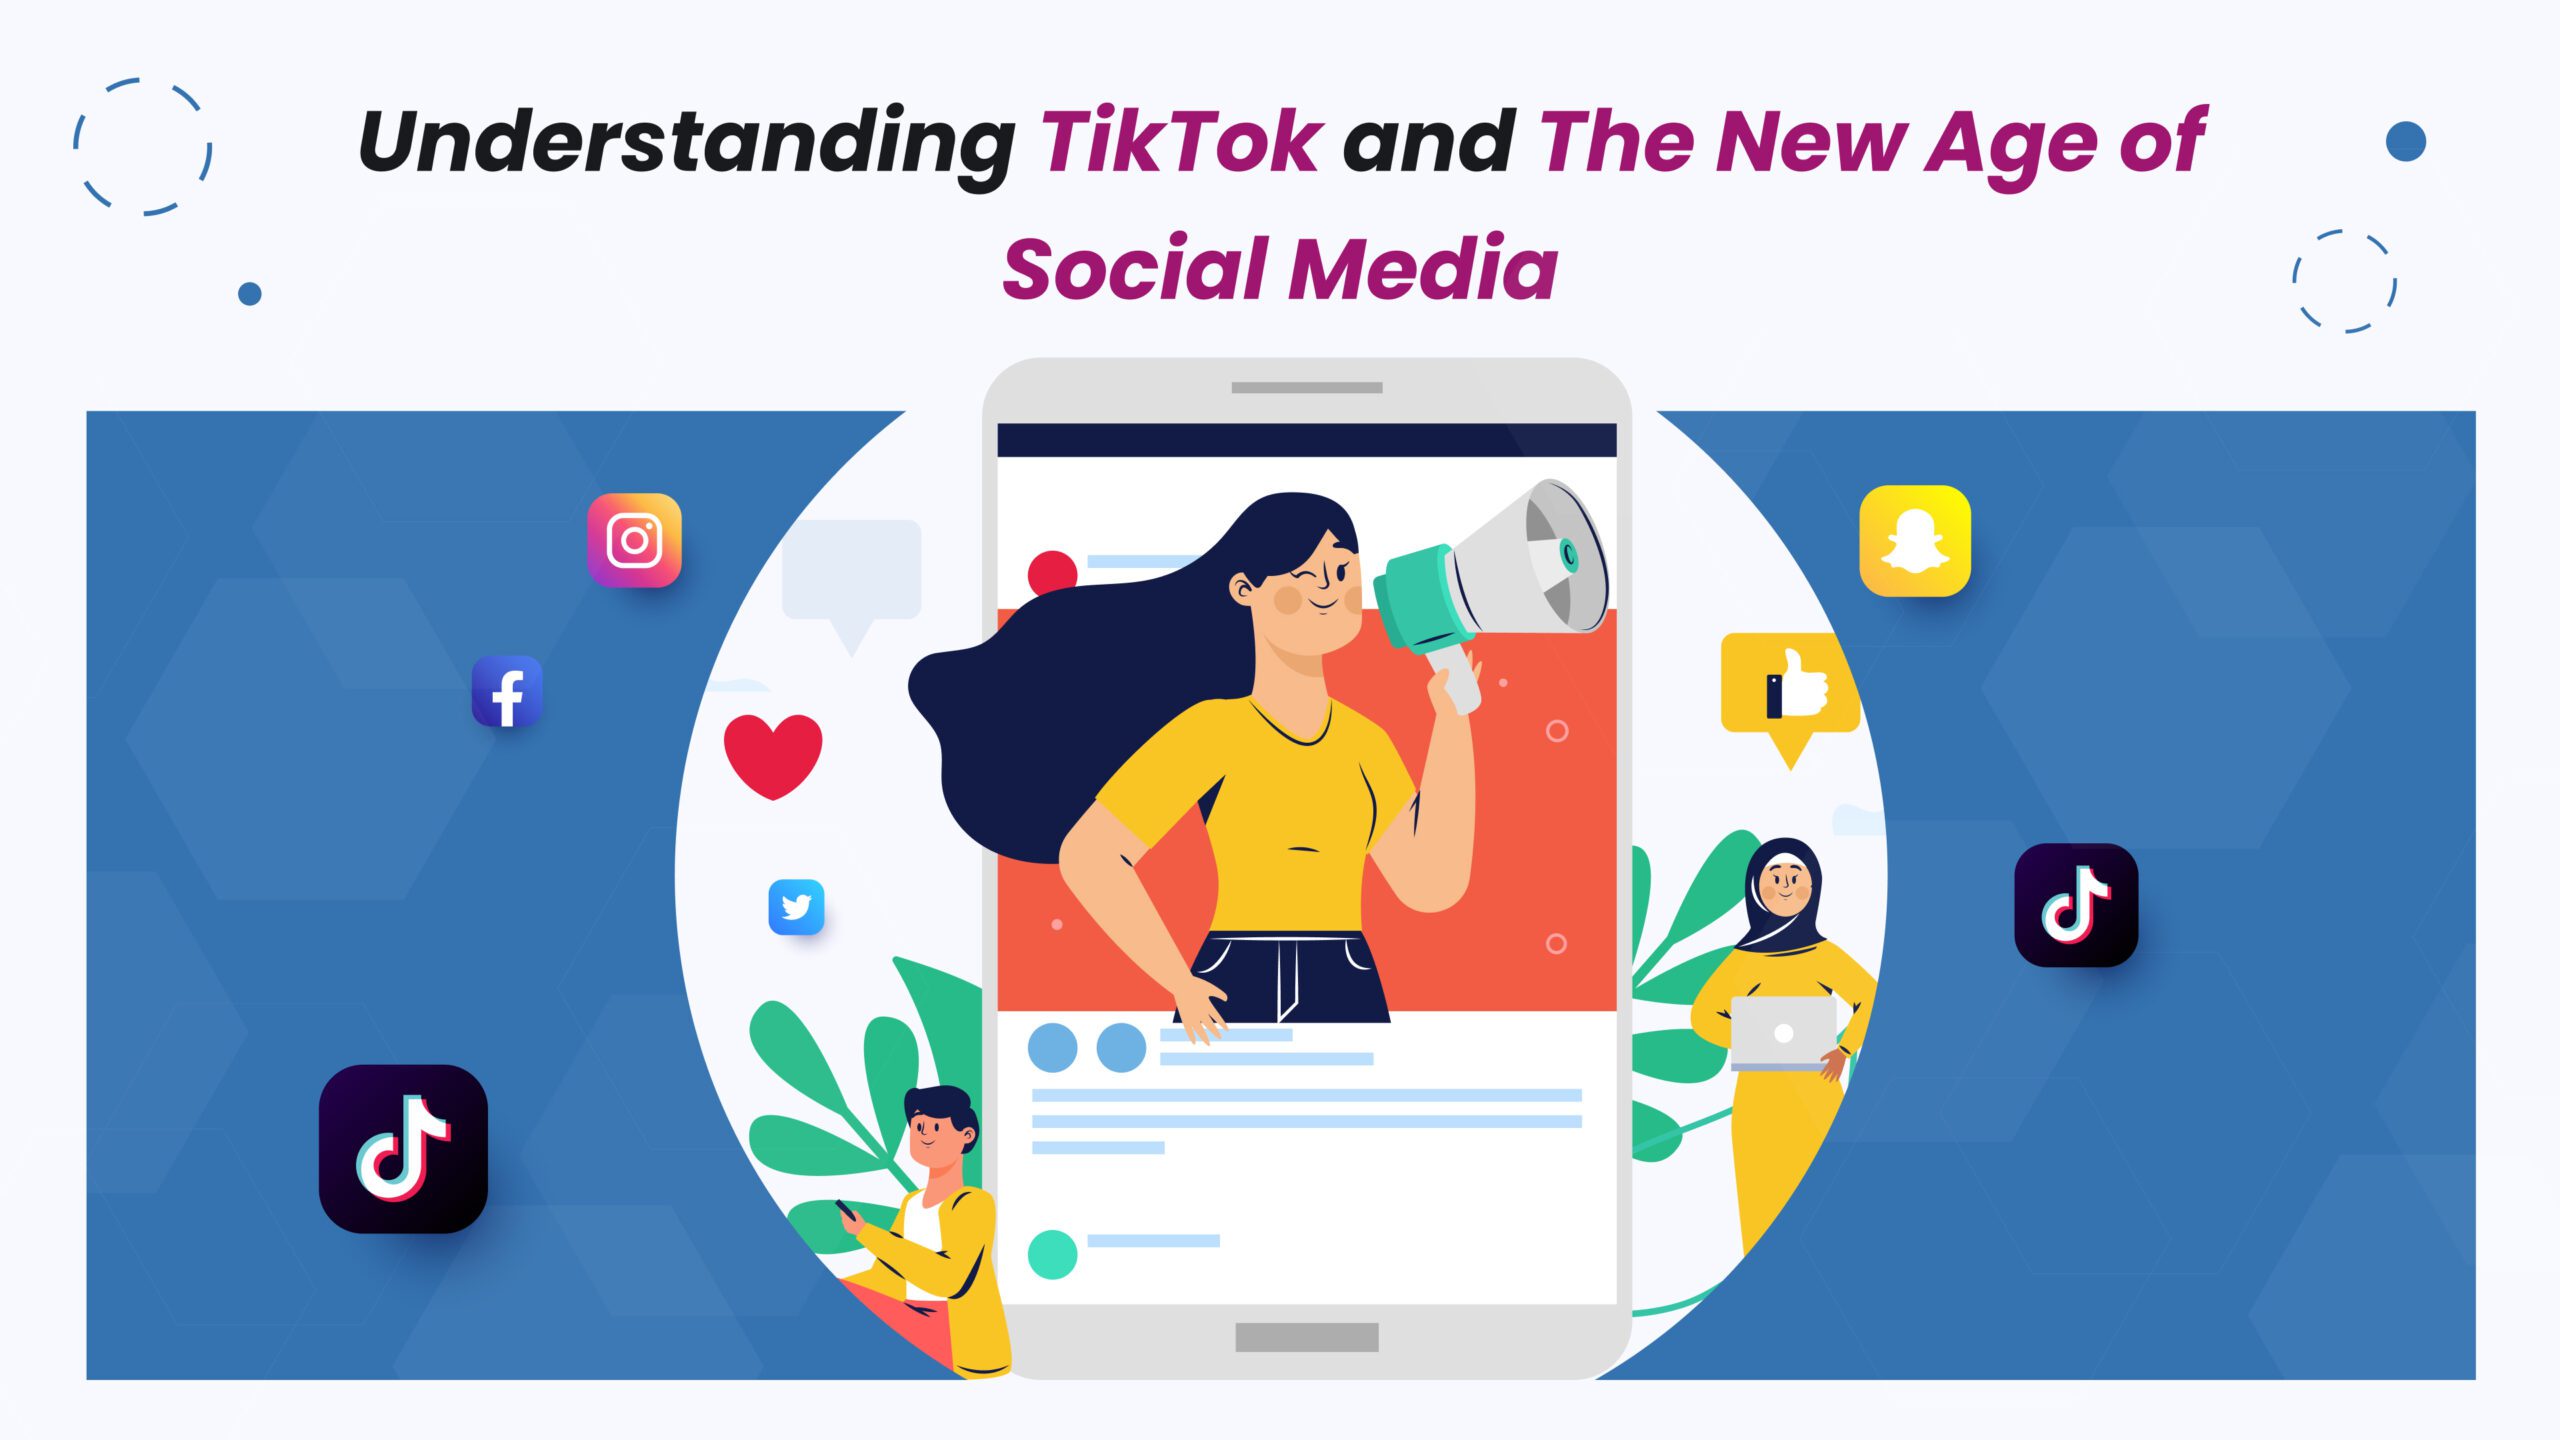 Case Study: Story of TikTok and The New Age of Social Media